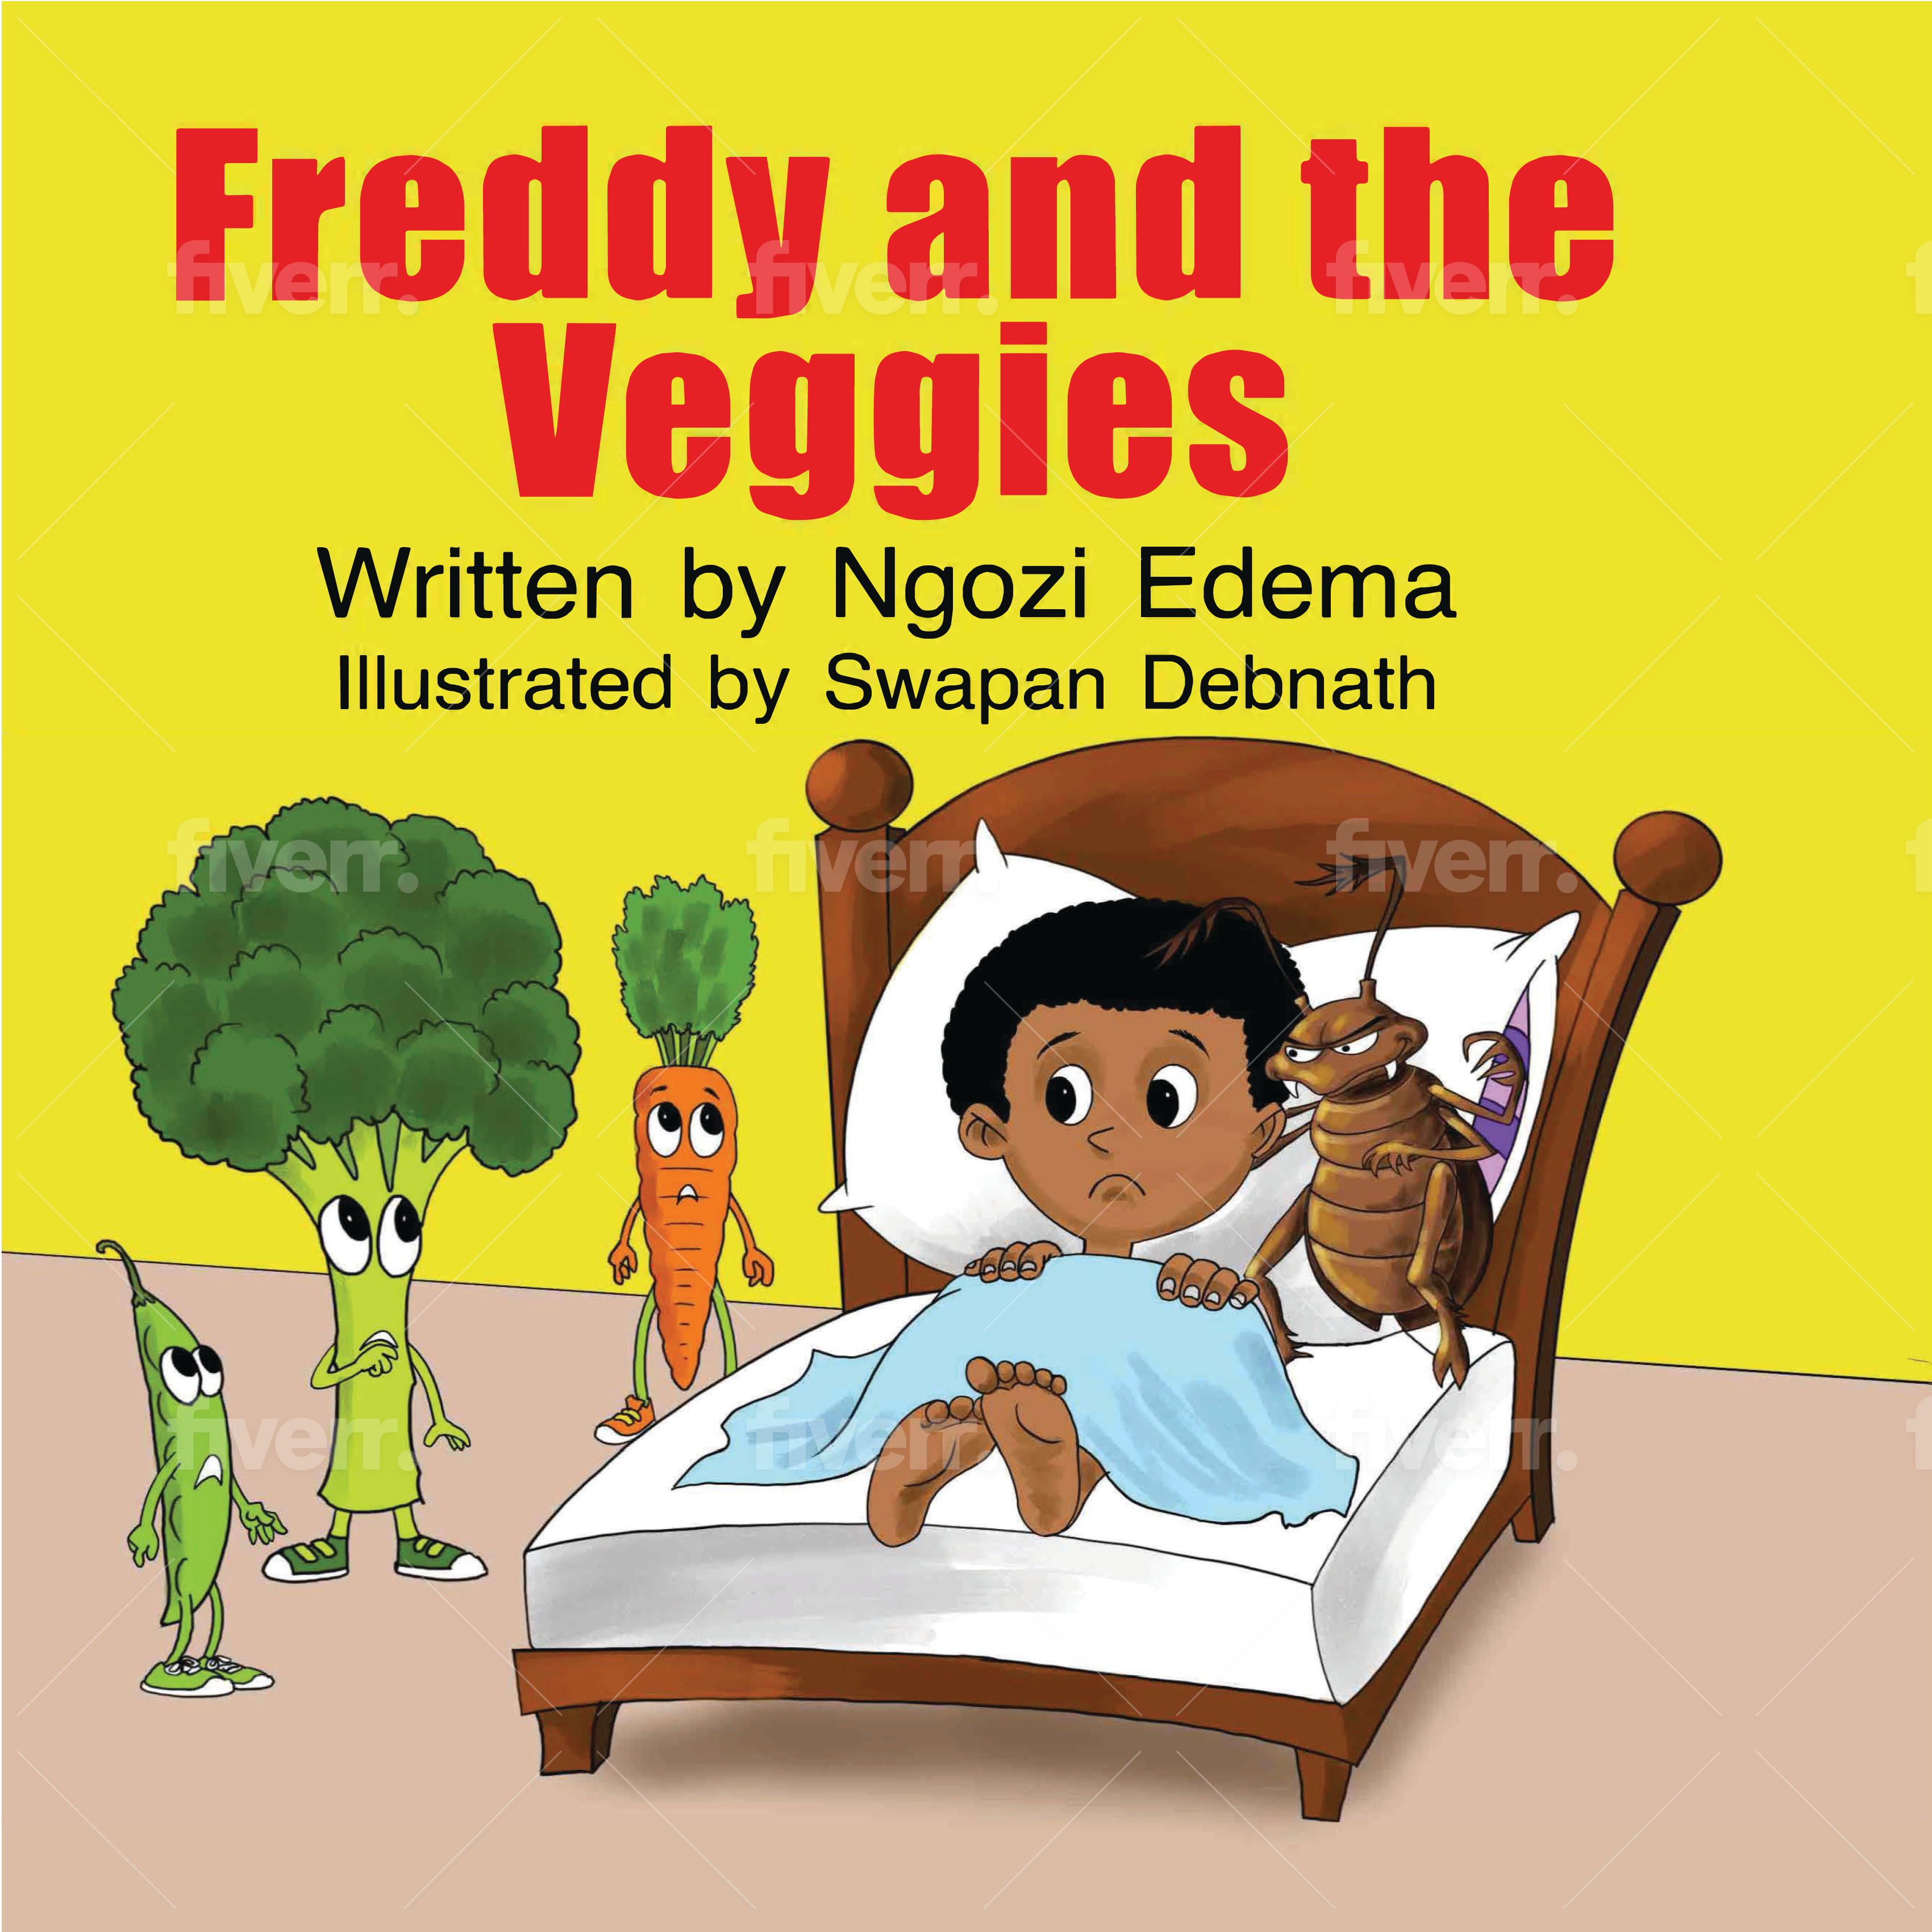 Freddy and the veggies cover page